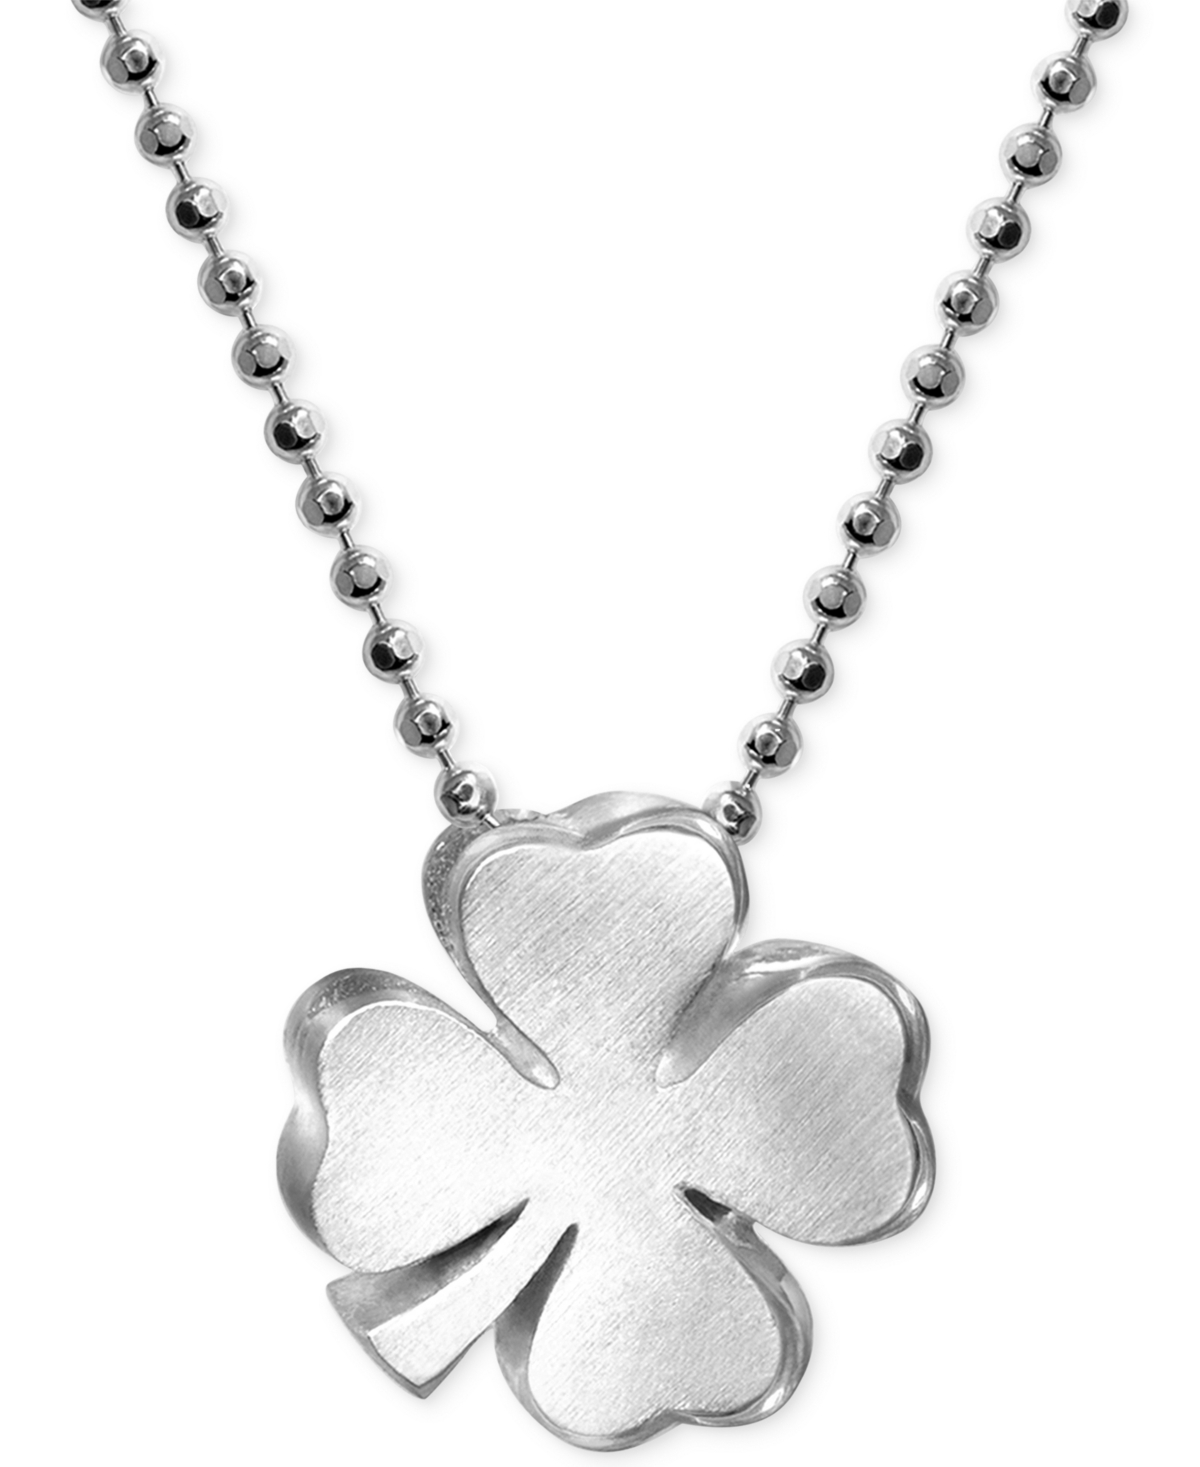 Little Faith Clover Pendant Necklace in Sterling Silver